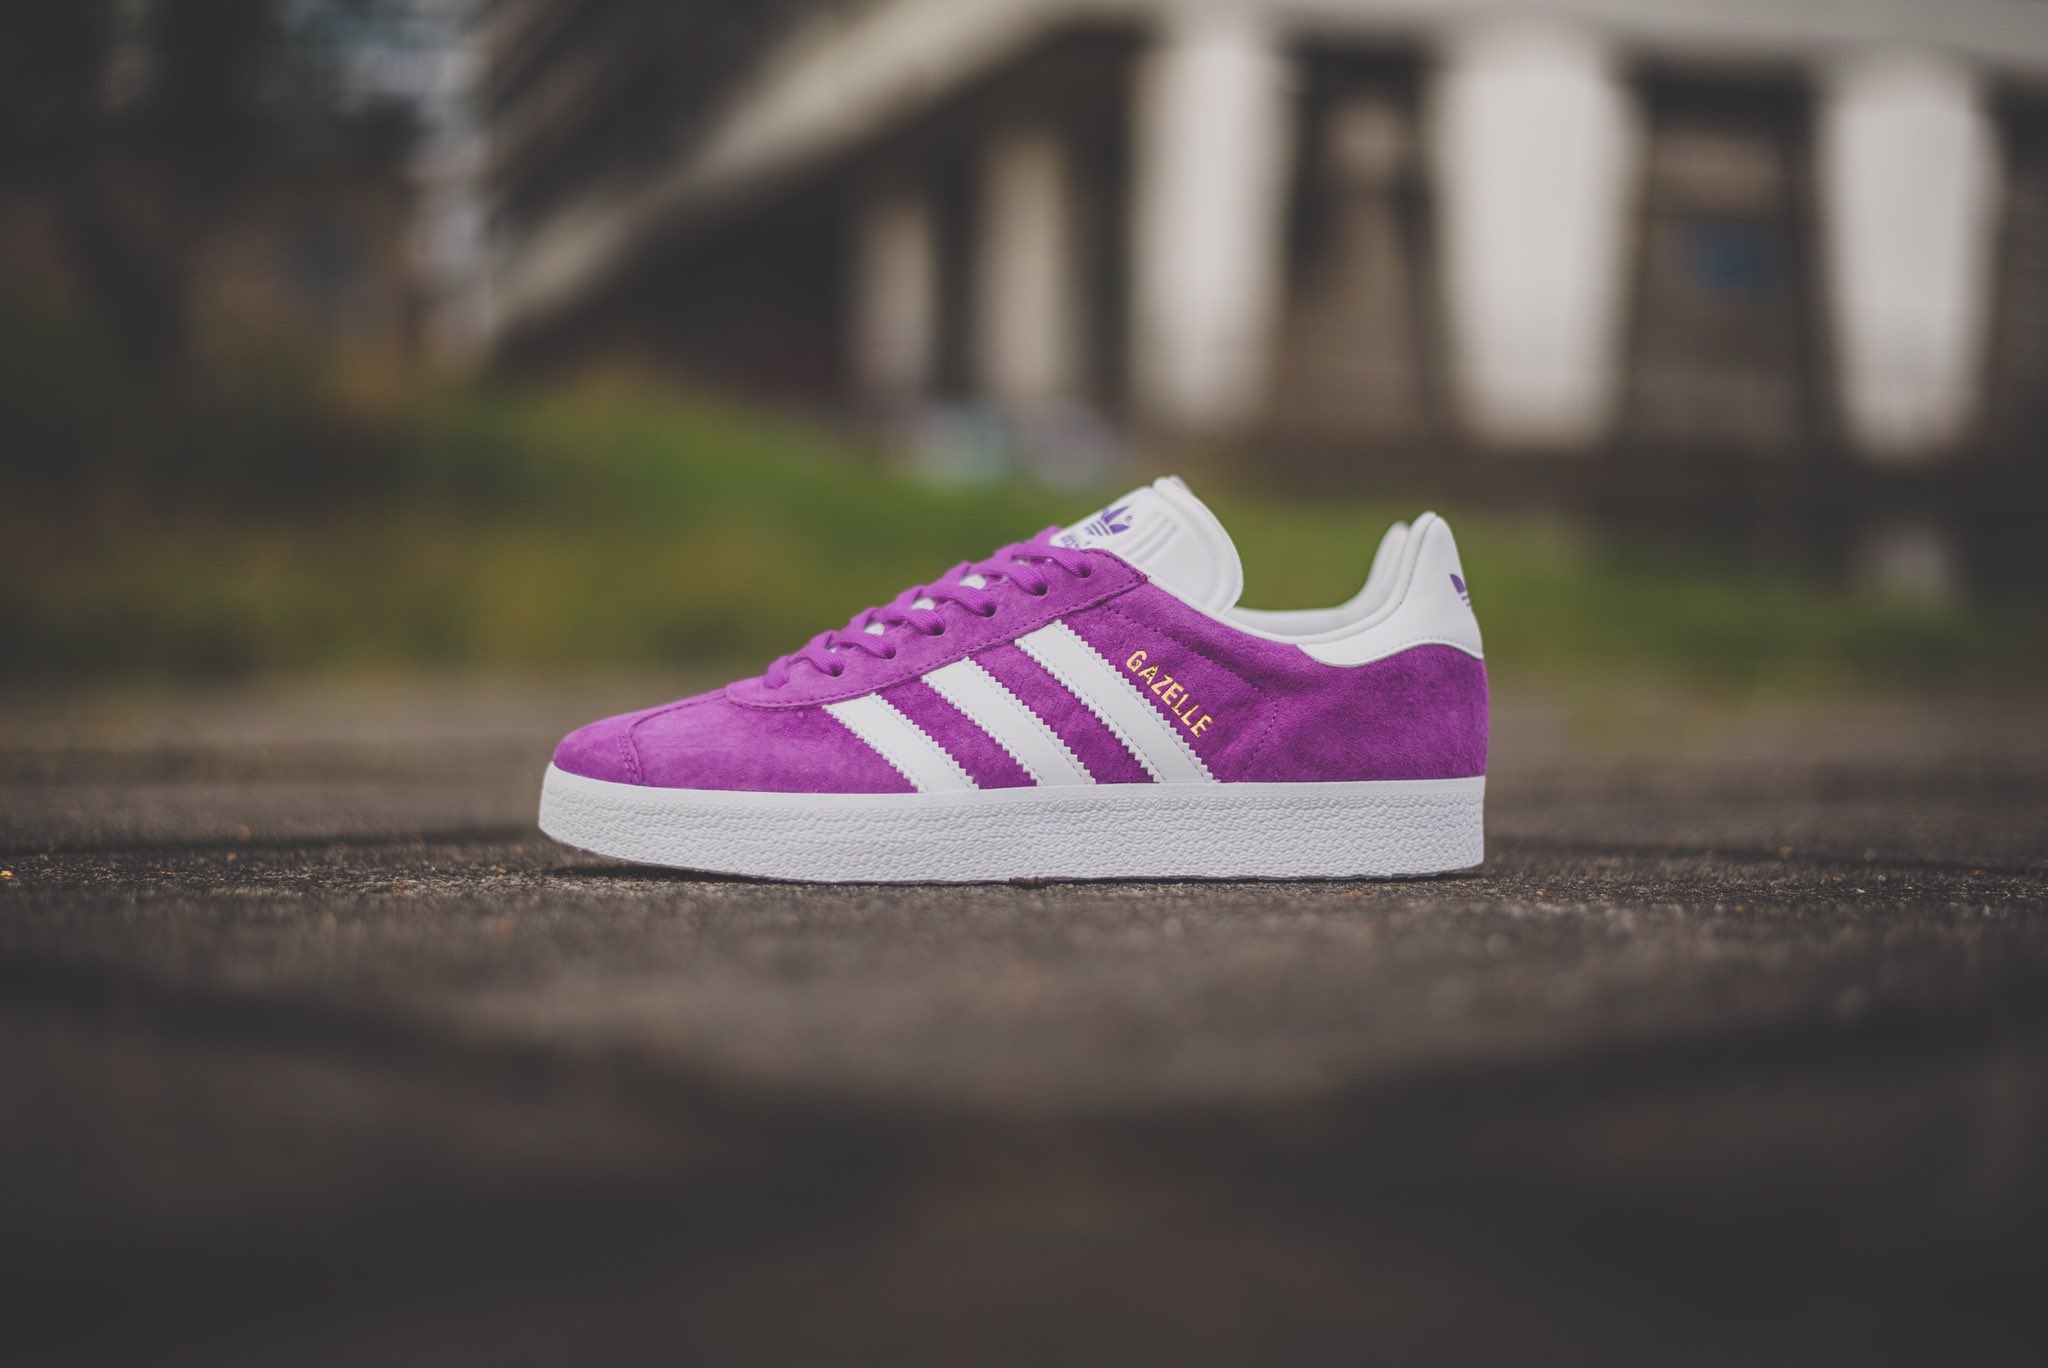 on Twitter: "adidas Gazelle "Shock Purple" is available ONLINE now! #hanon #adidas https://t.co/ydTw6B4ydH https://t.co/hTbEKyXV6c" Twitter